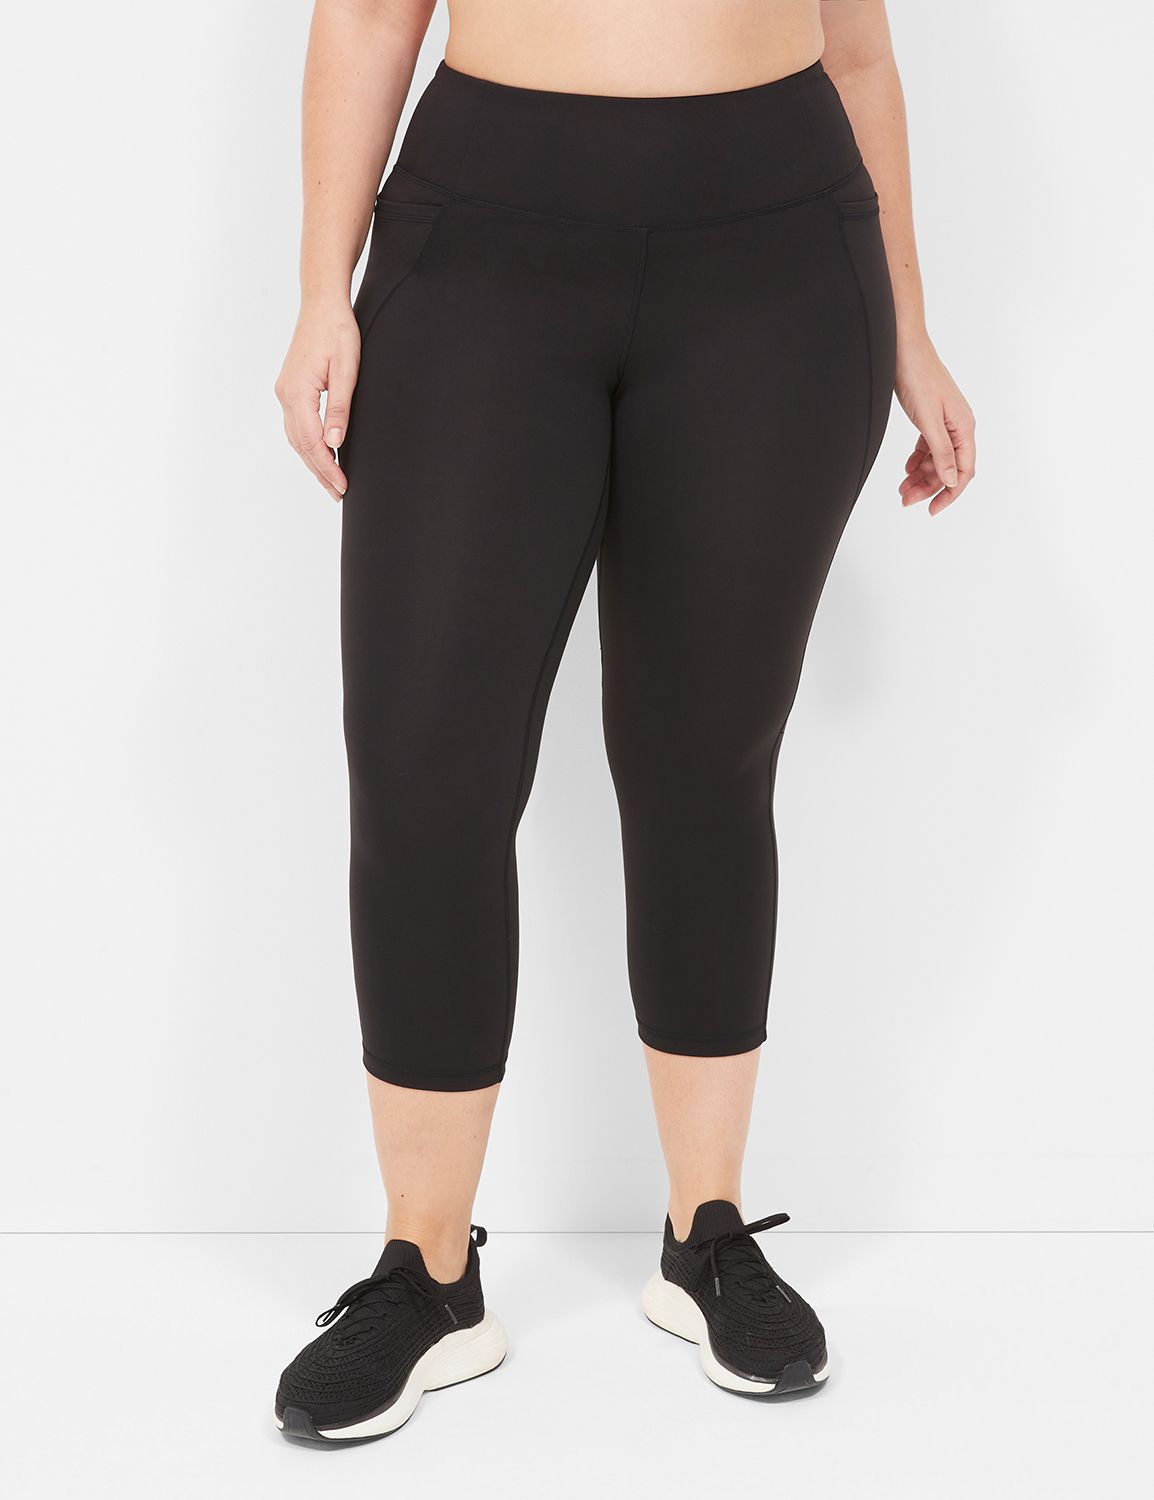 LMB High Waisted Leggings for Women - Black - Plus Size - Workout